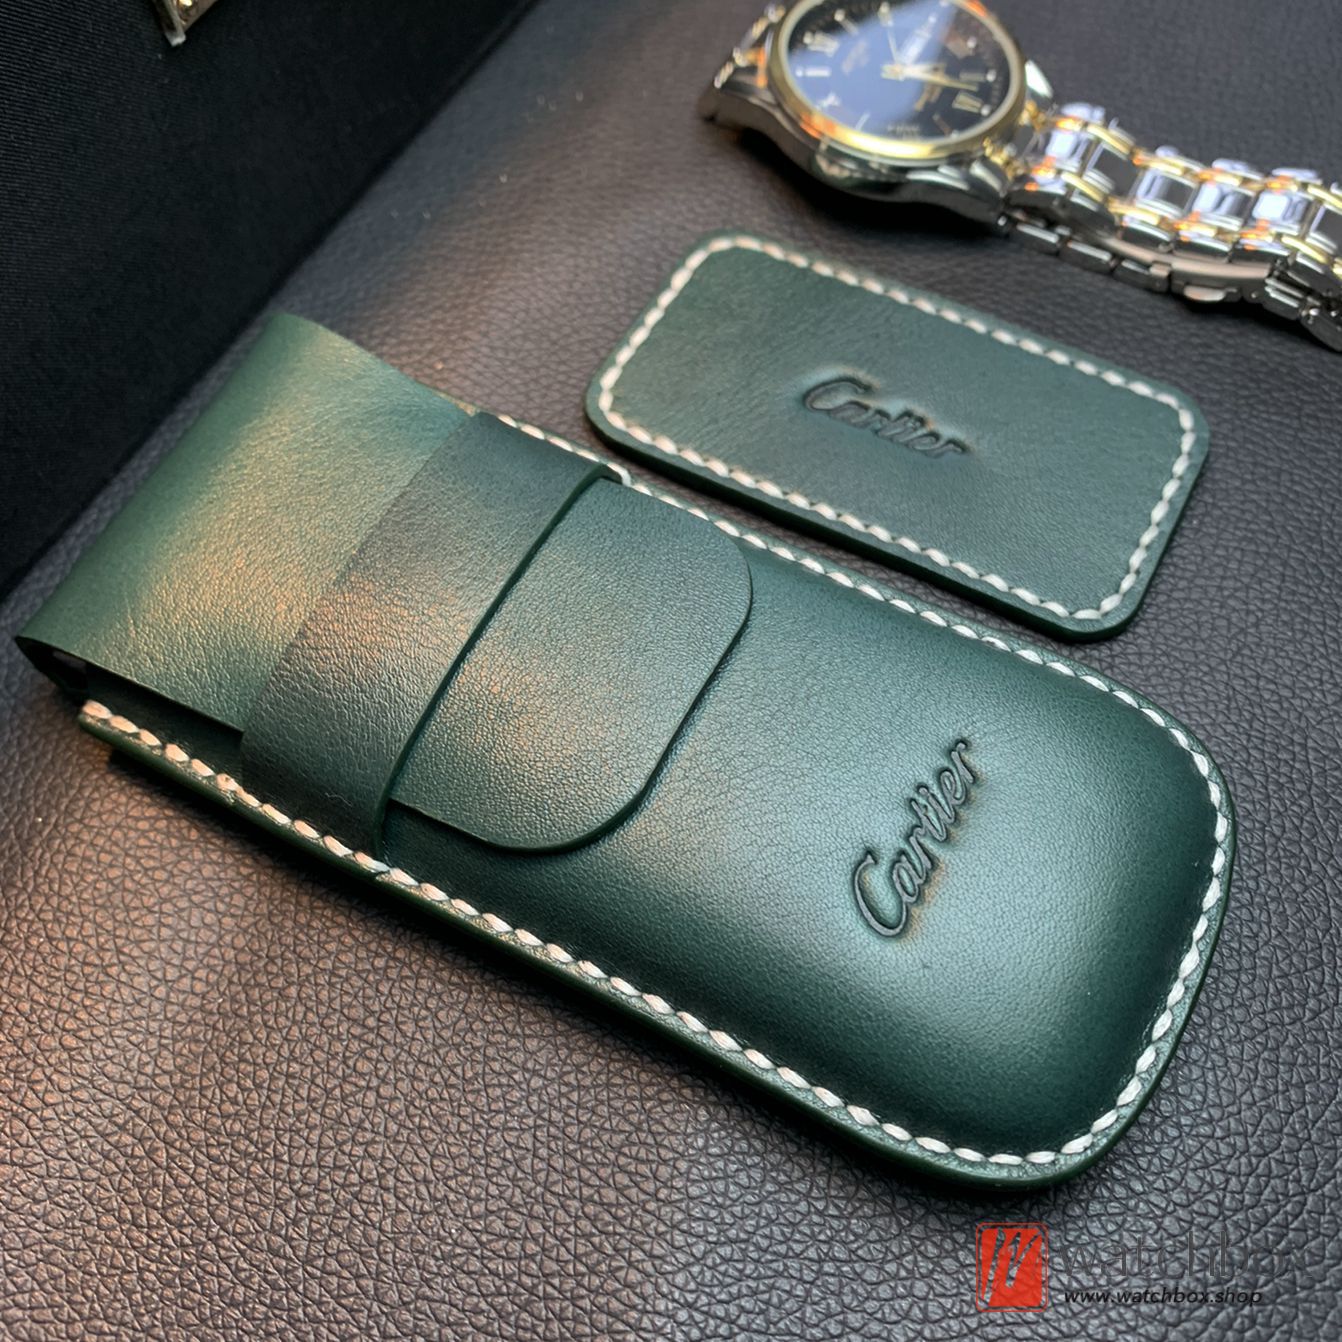 The Luxury Genuine Leather Watch Storage Pouch Travel Bag Brand Logo Private Customized